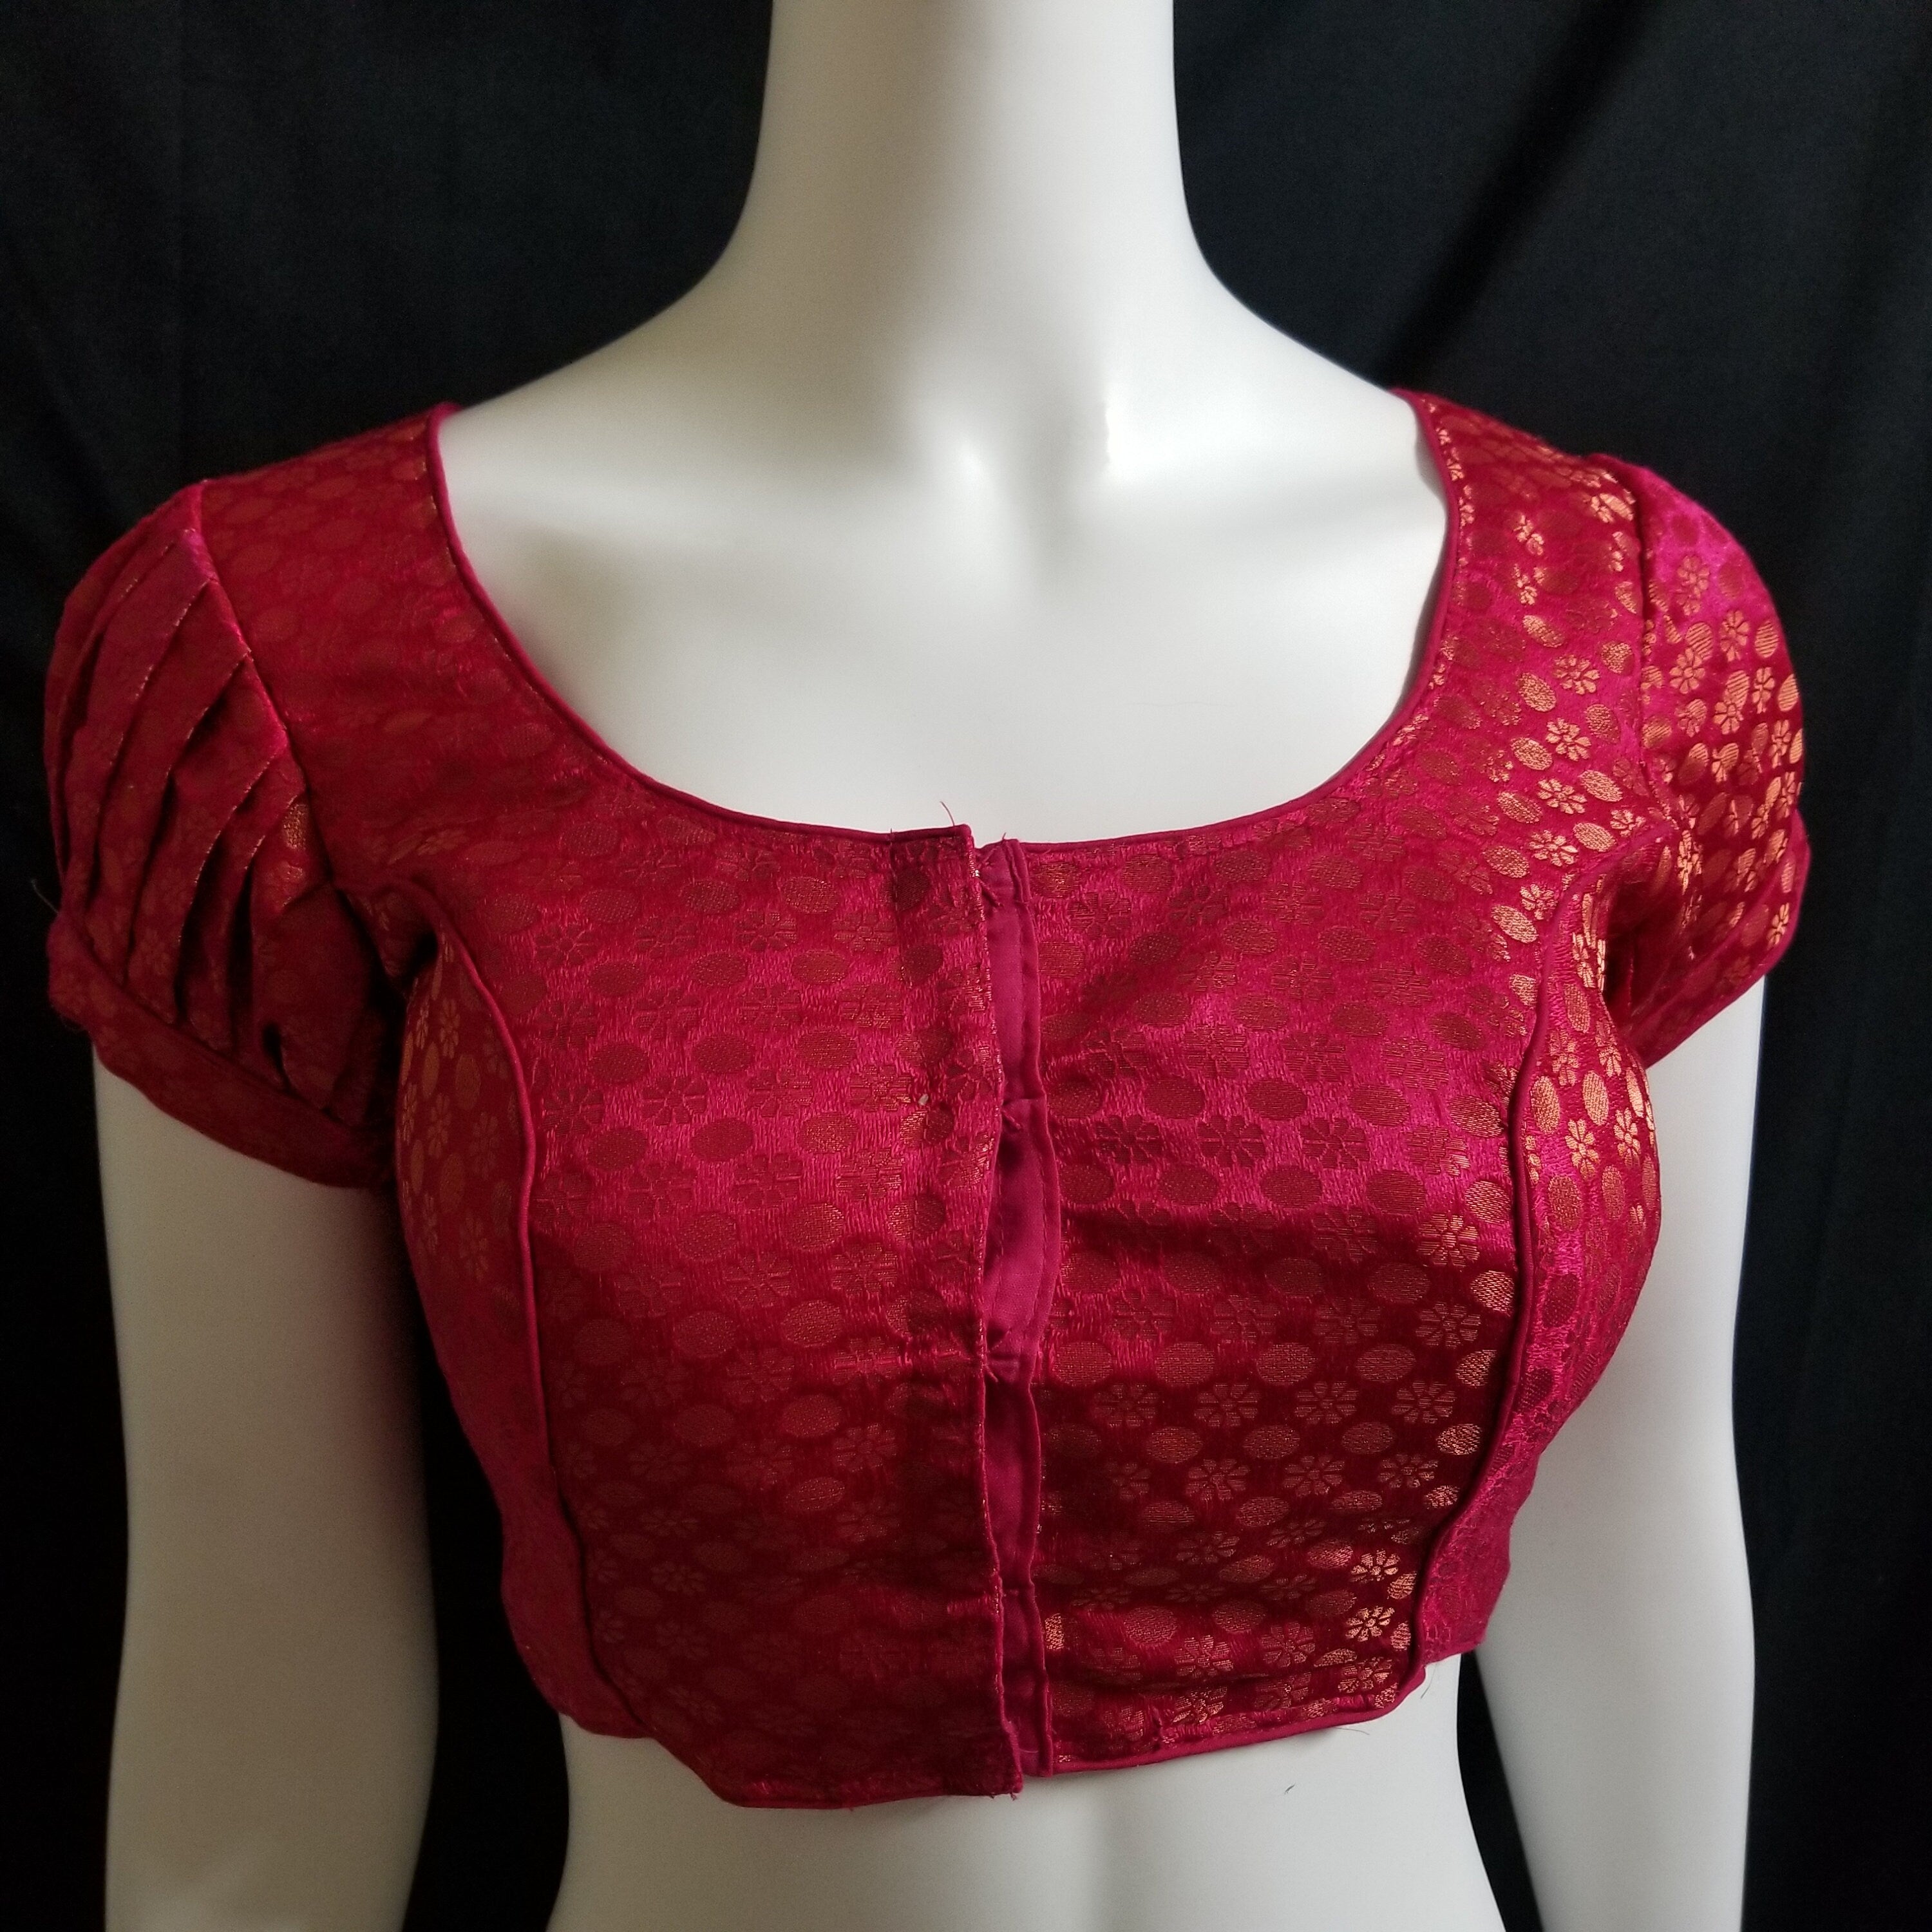 Readymade Saree Blouse - Dark Pink Puff Silk base Blouse - Princess cut with (removable) pad Blouse - size 36" (Can alter 34, 38)